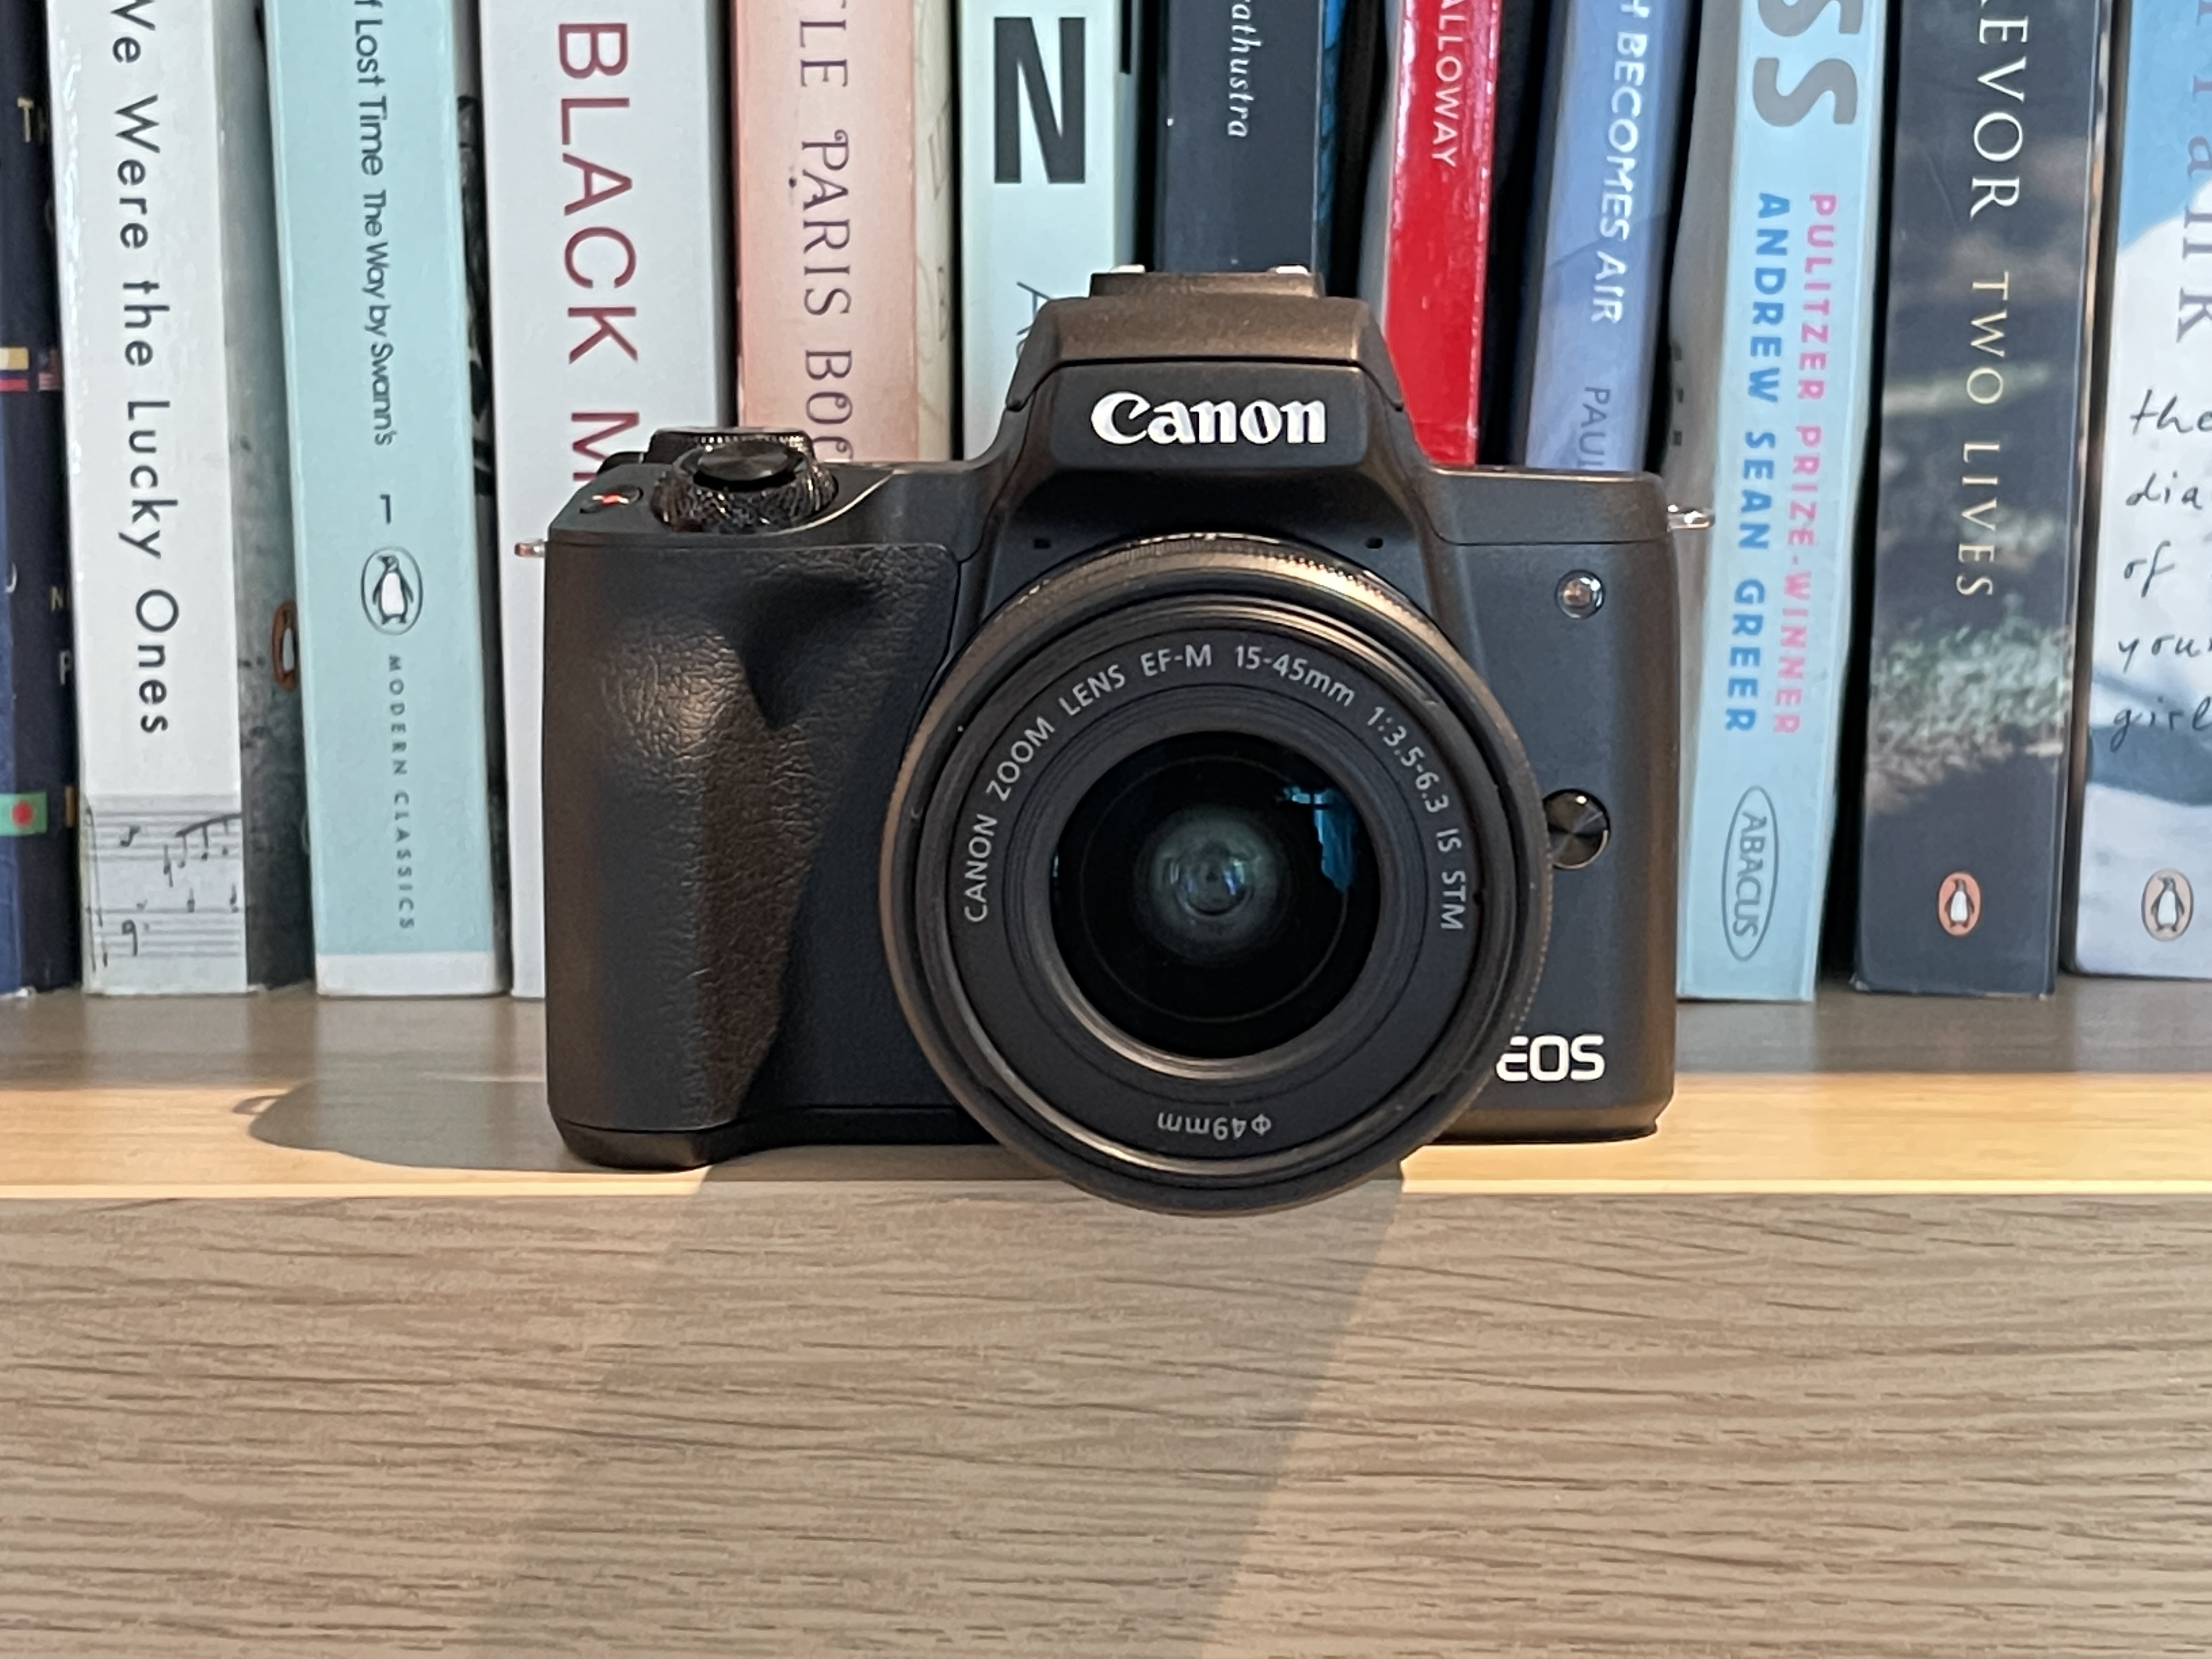 Canon EOS M50 Mark II, one of the best Canon cameras, sitting on a bookshelf